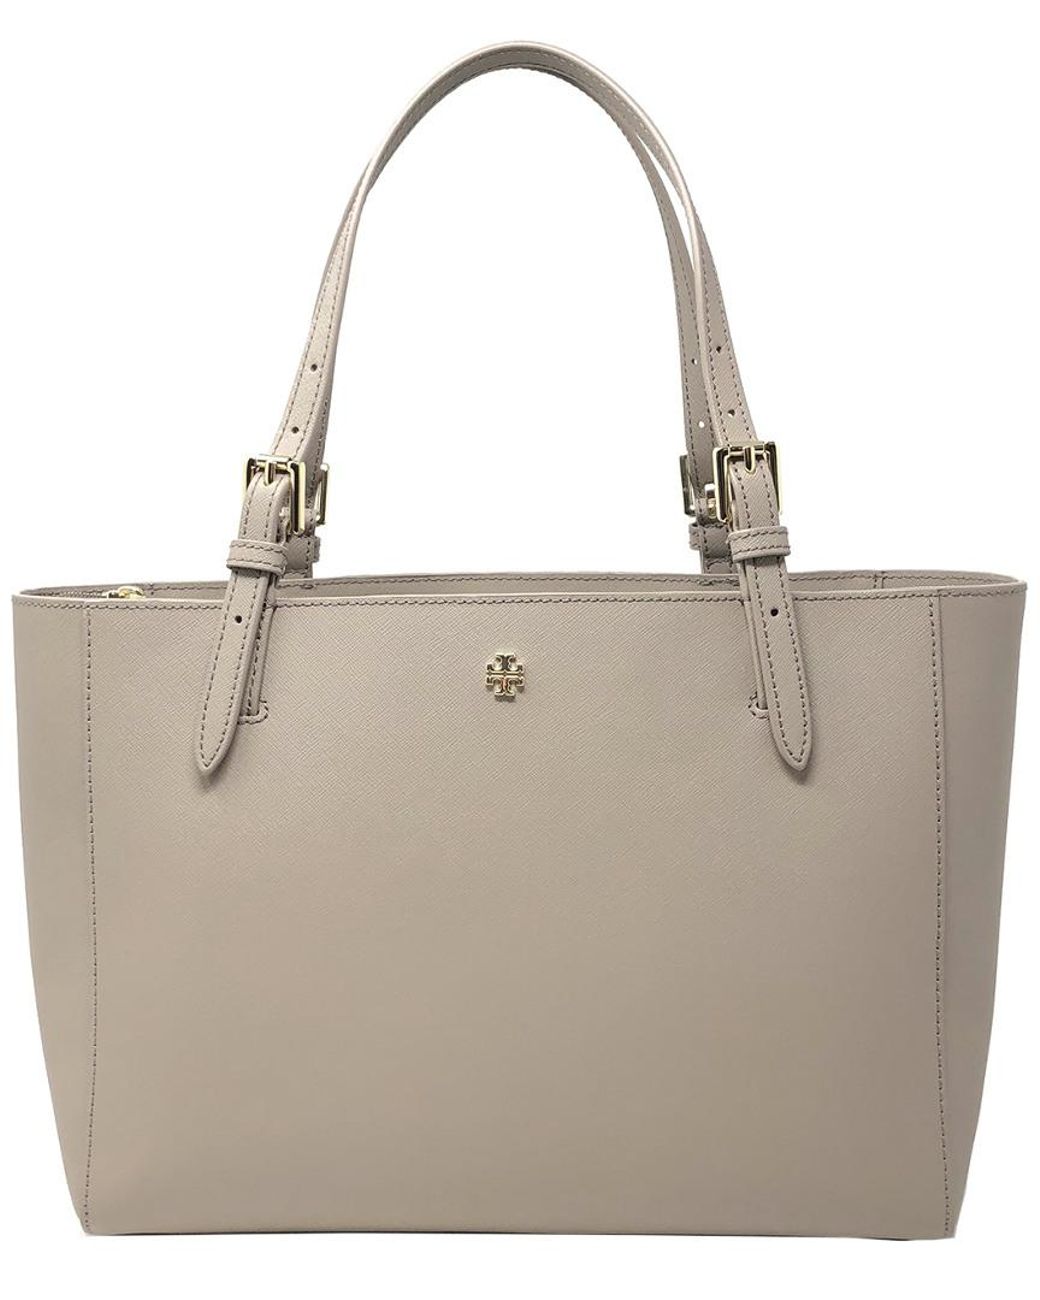 Tory Burch Emerson Saffiano Leather Buckle Tote - $199 - From Anna